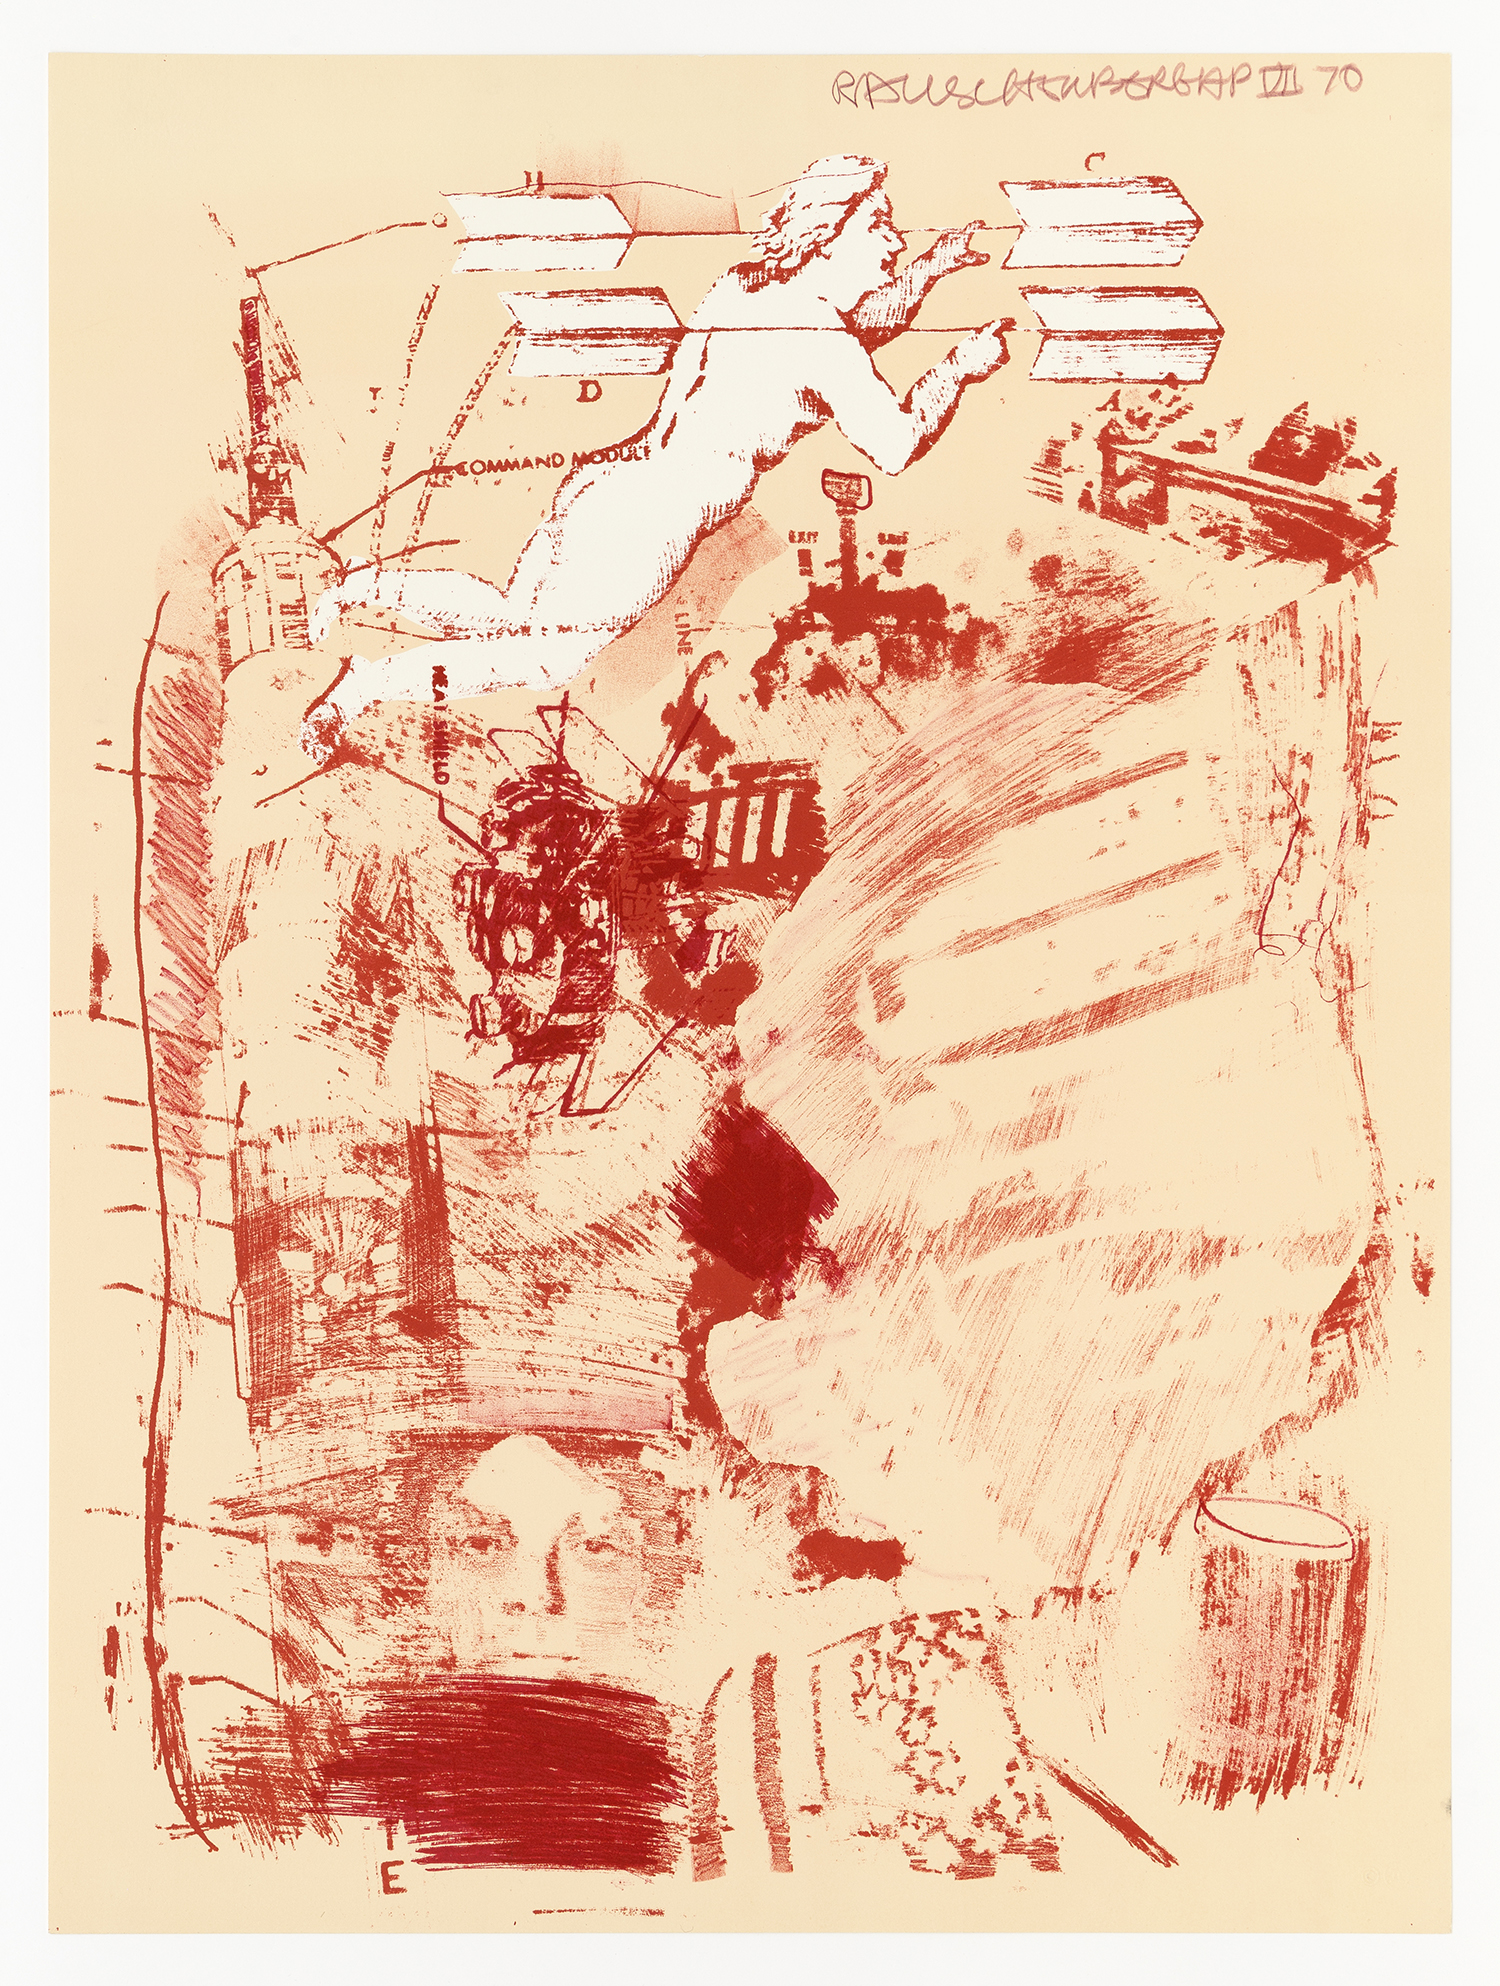 Score, 1970, Lithograph26 x 19 1/2 inches (66 x 49.5 cm) Edition of 75